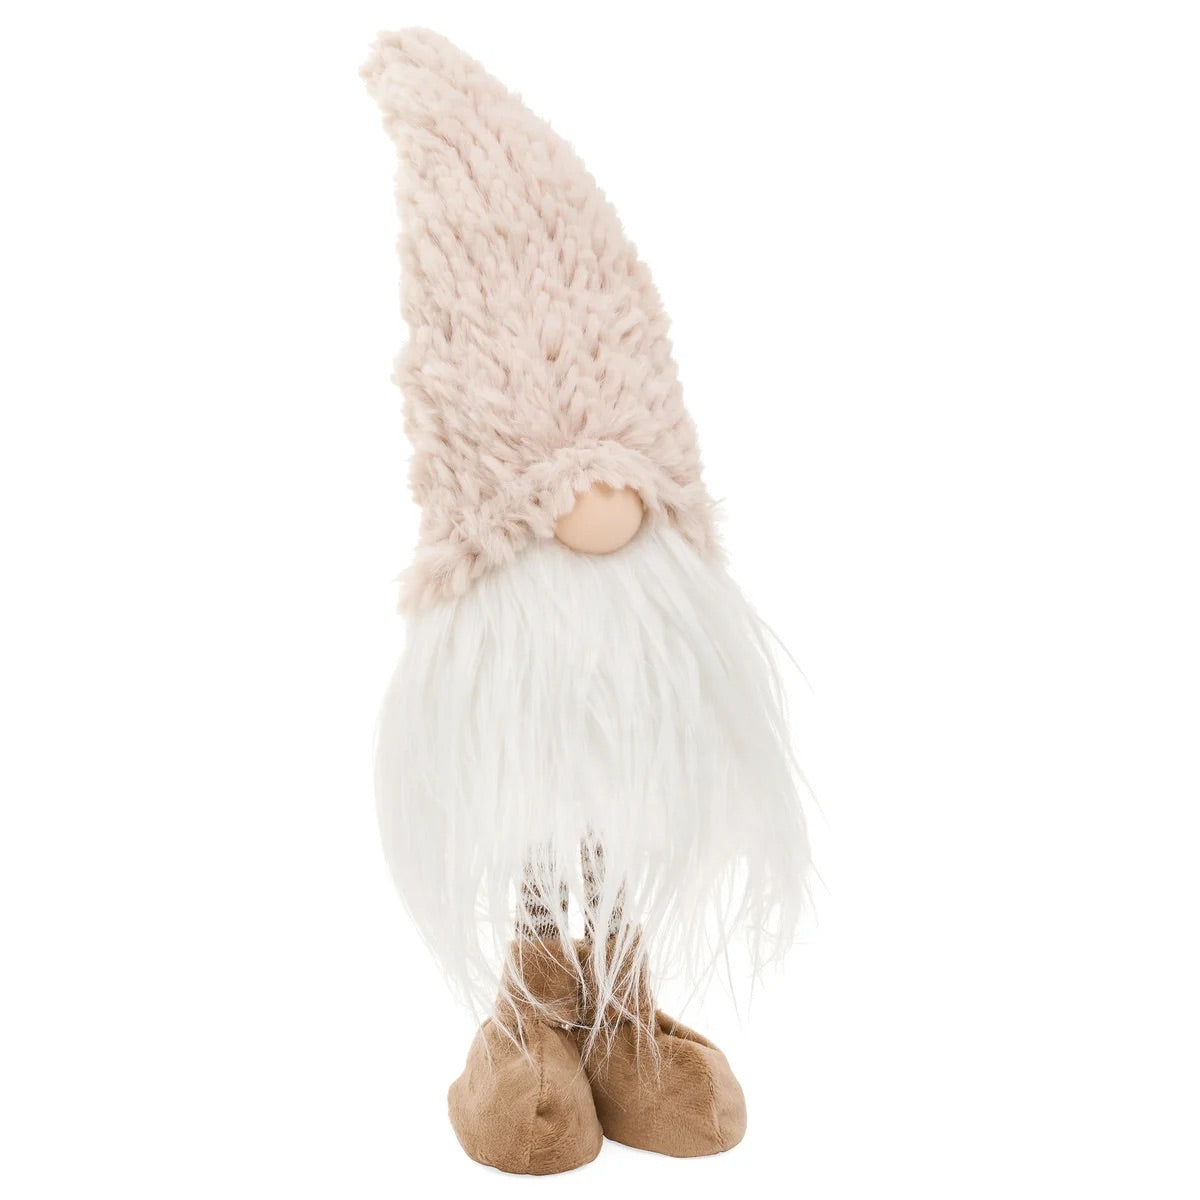 GNOME, STANDING W/KNITTED HAT - BEIGE